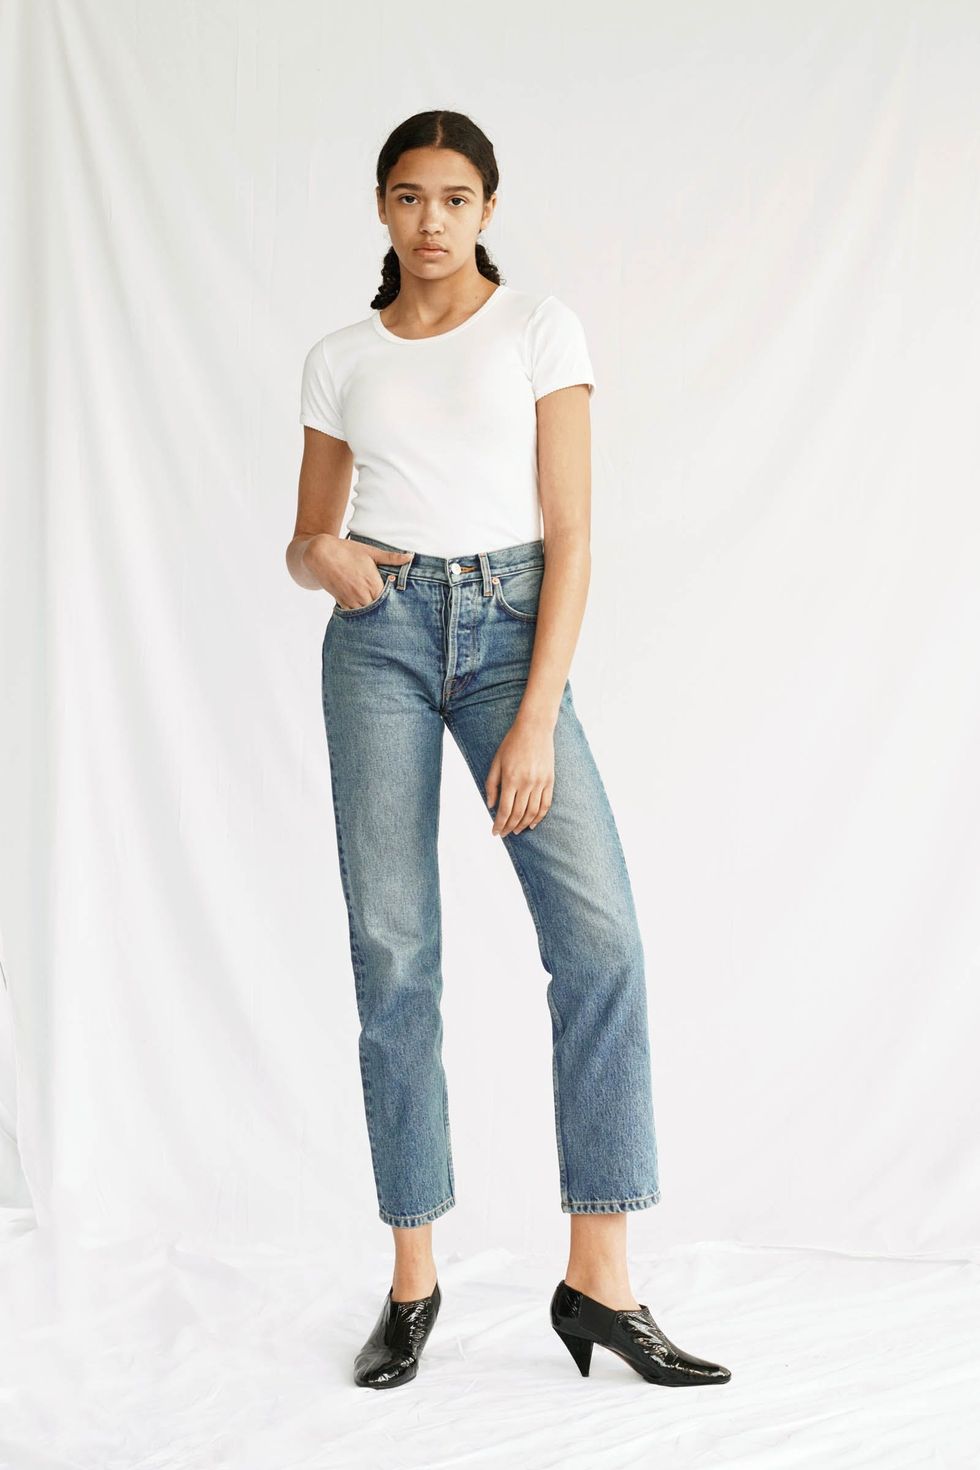 9 New Denim Brands to Zip Into This Fall - Brit + Co